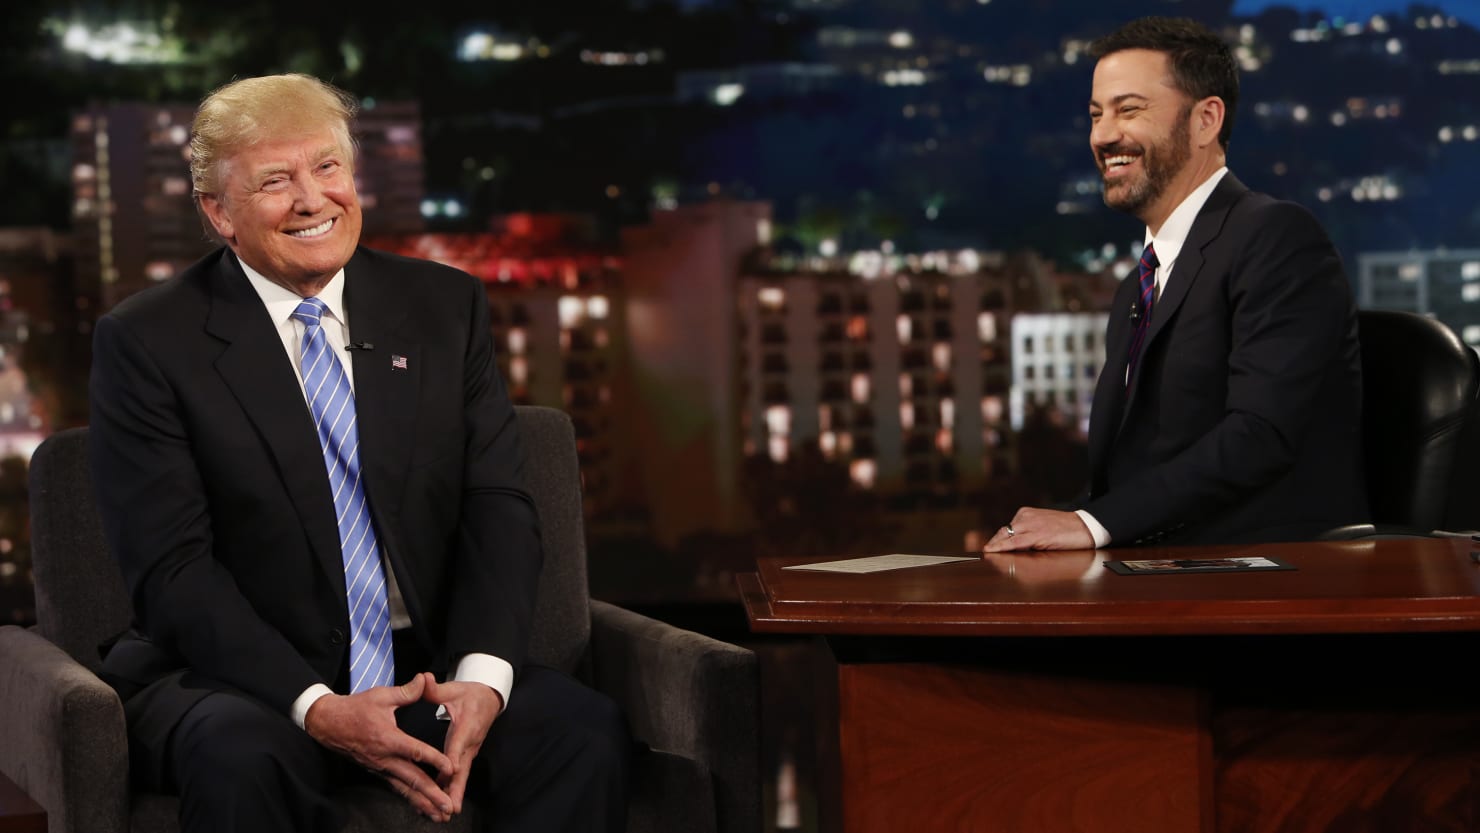 Why Is Trump Confusing Jimmy Kimmel With Al Pacino All of a Sudden?